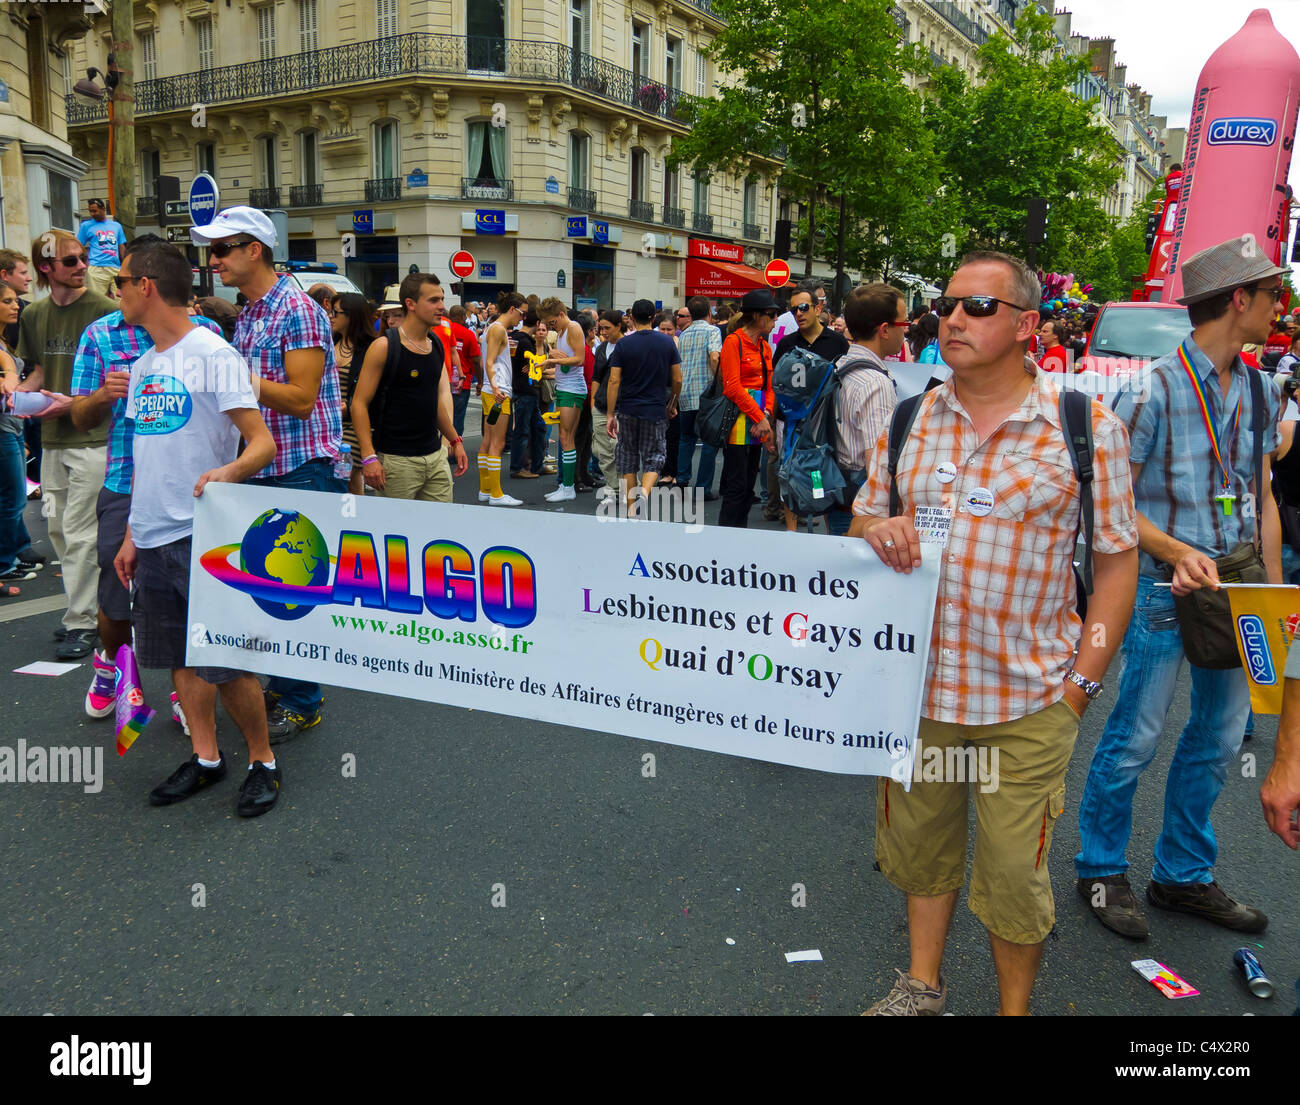 Paris, France, French Government Foreign office 'ALGO' Group with Banner at Gay Pride lgbt march banner, gay rights struggle, pride march Stock Photo